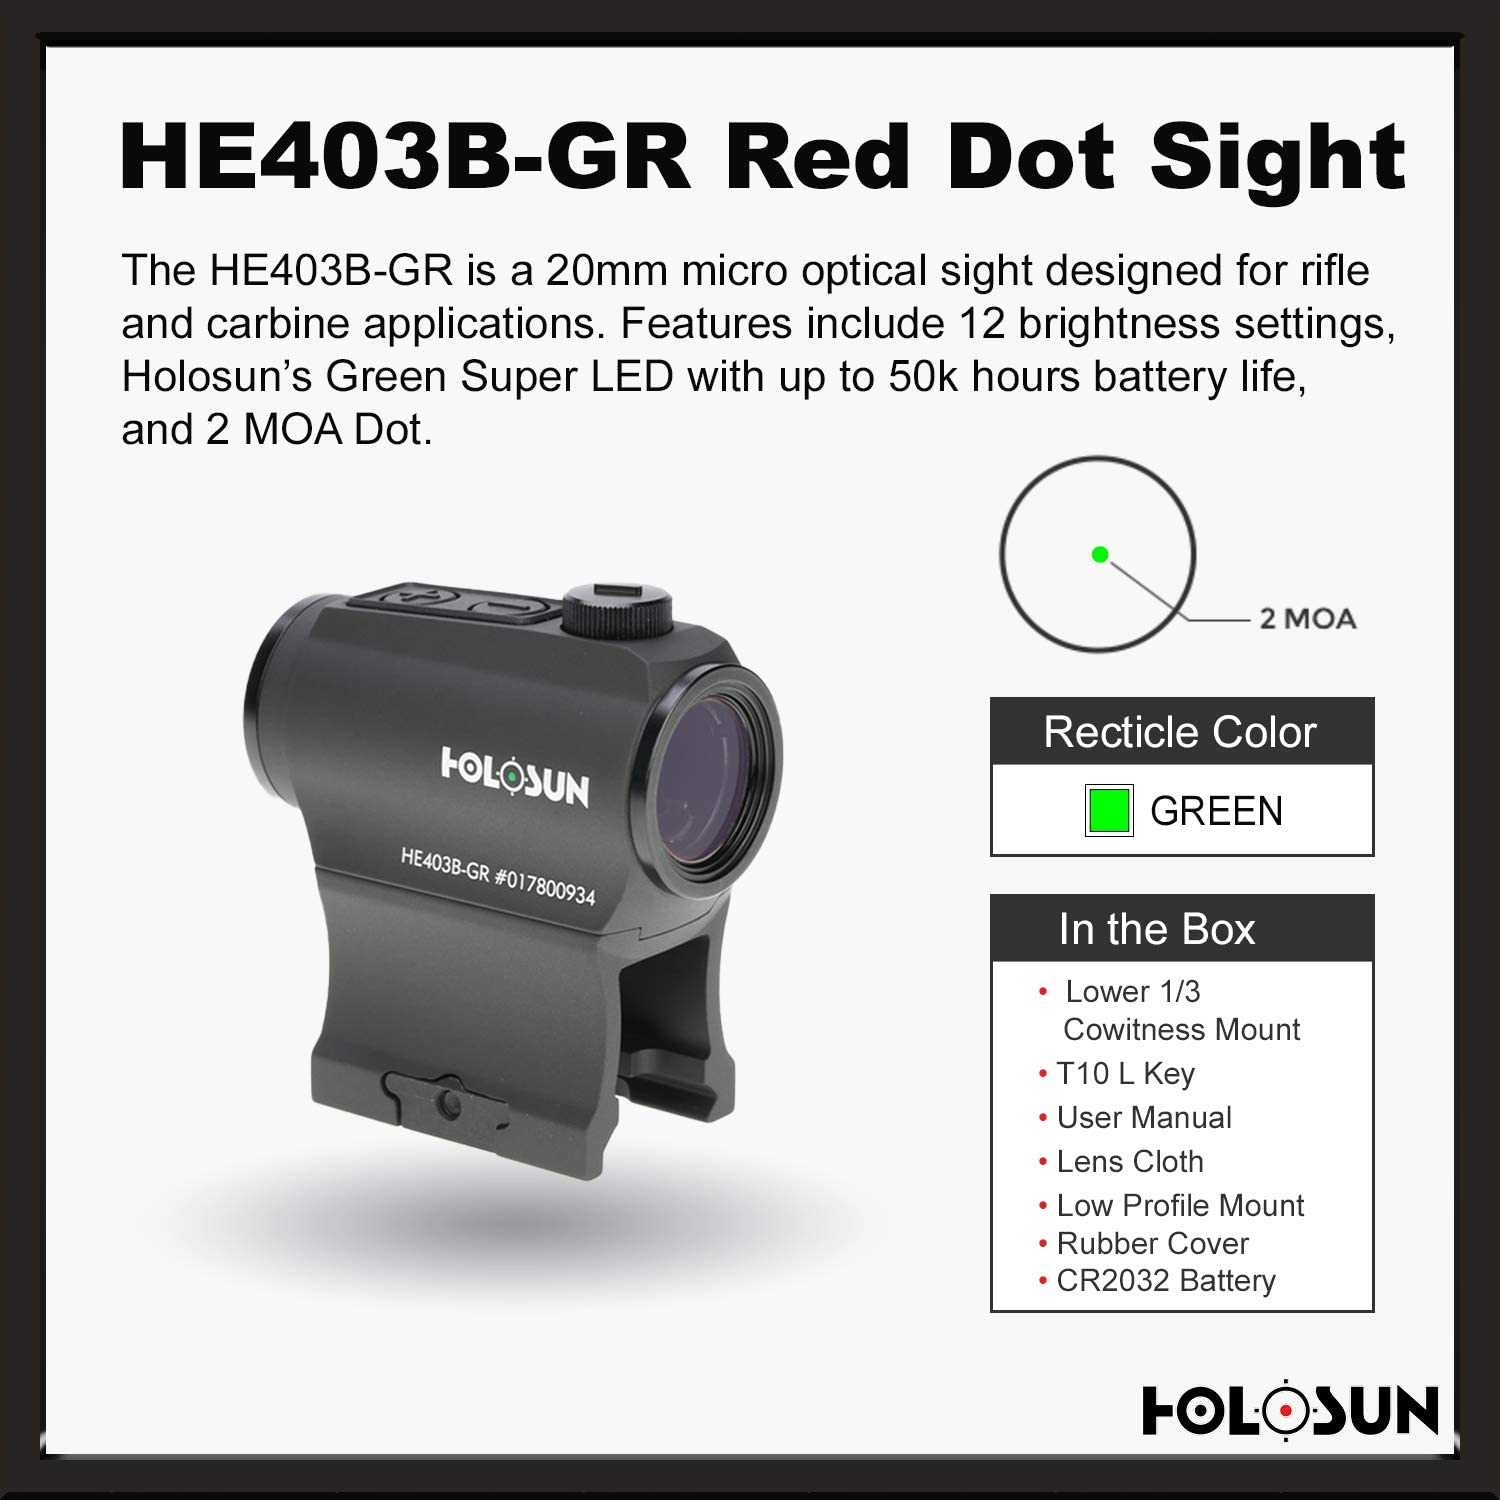 HE403B-GR Reticle color